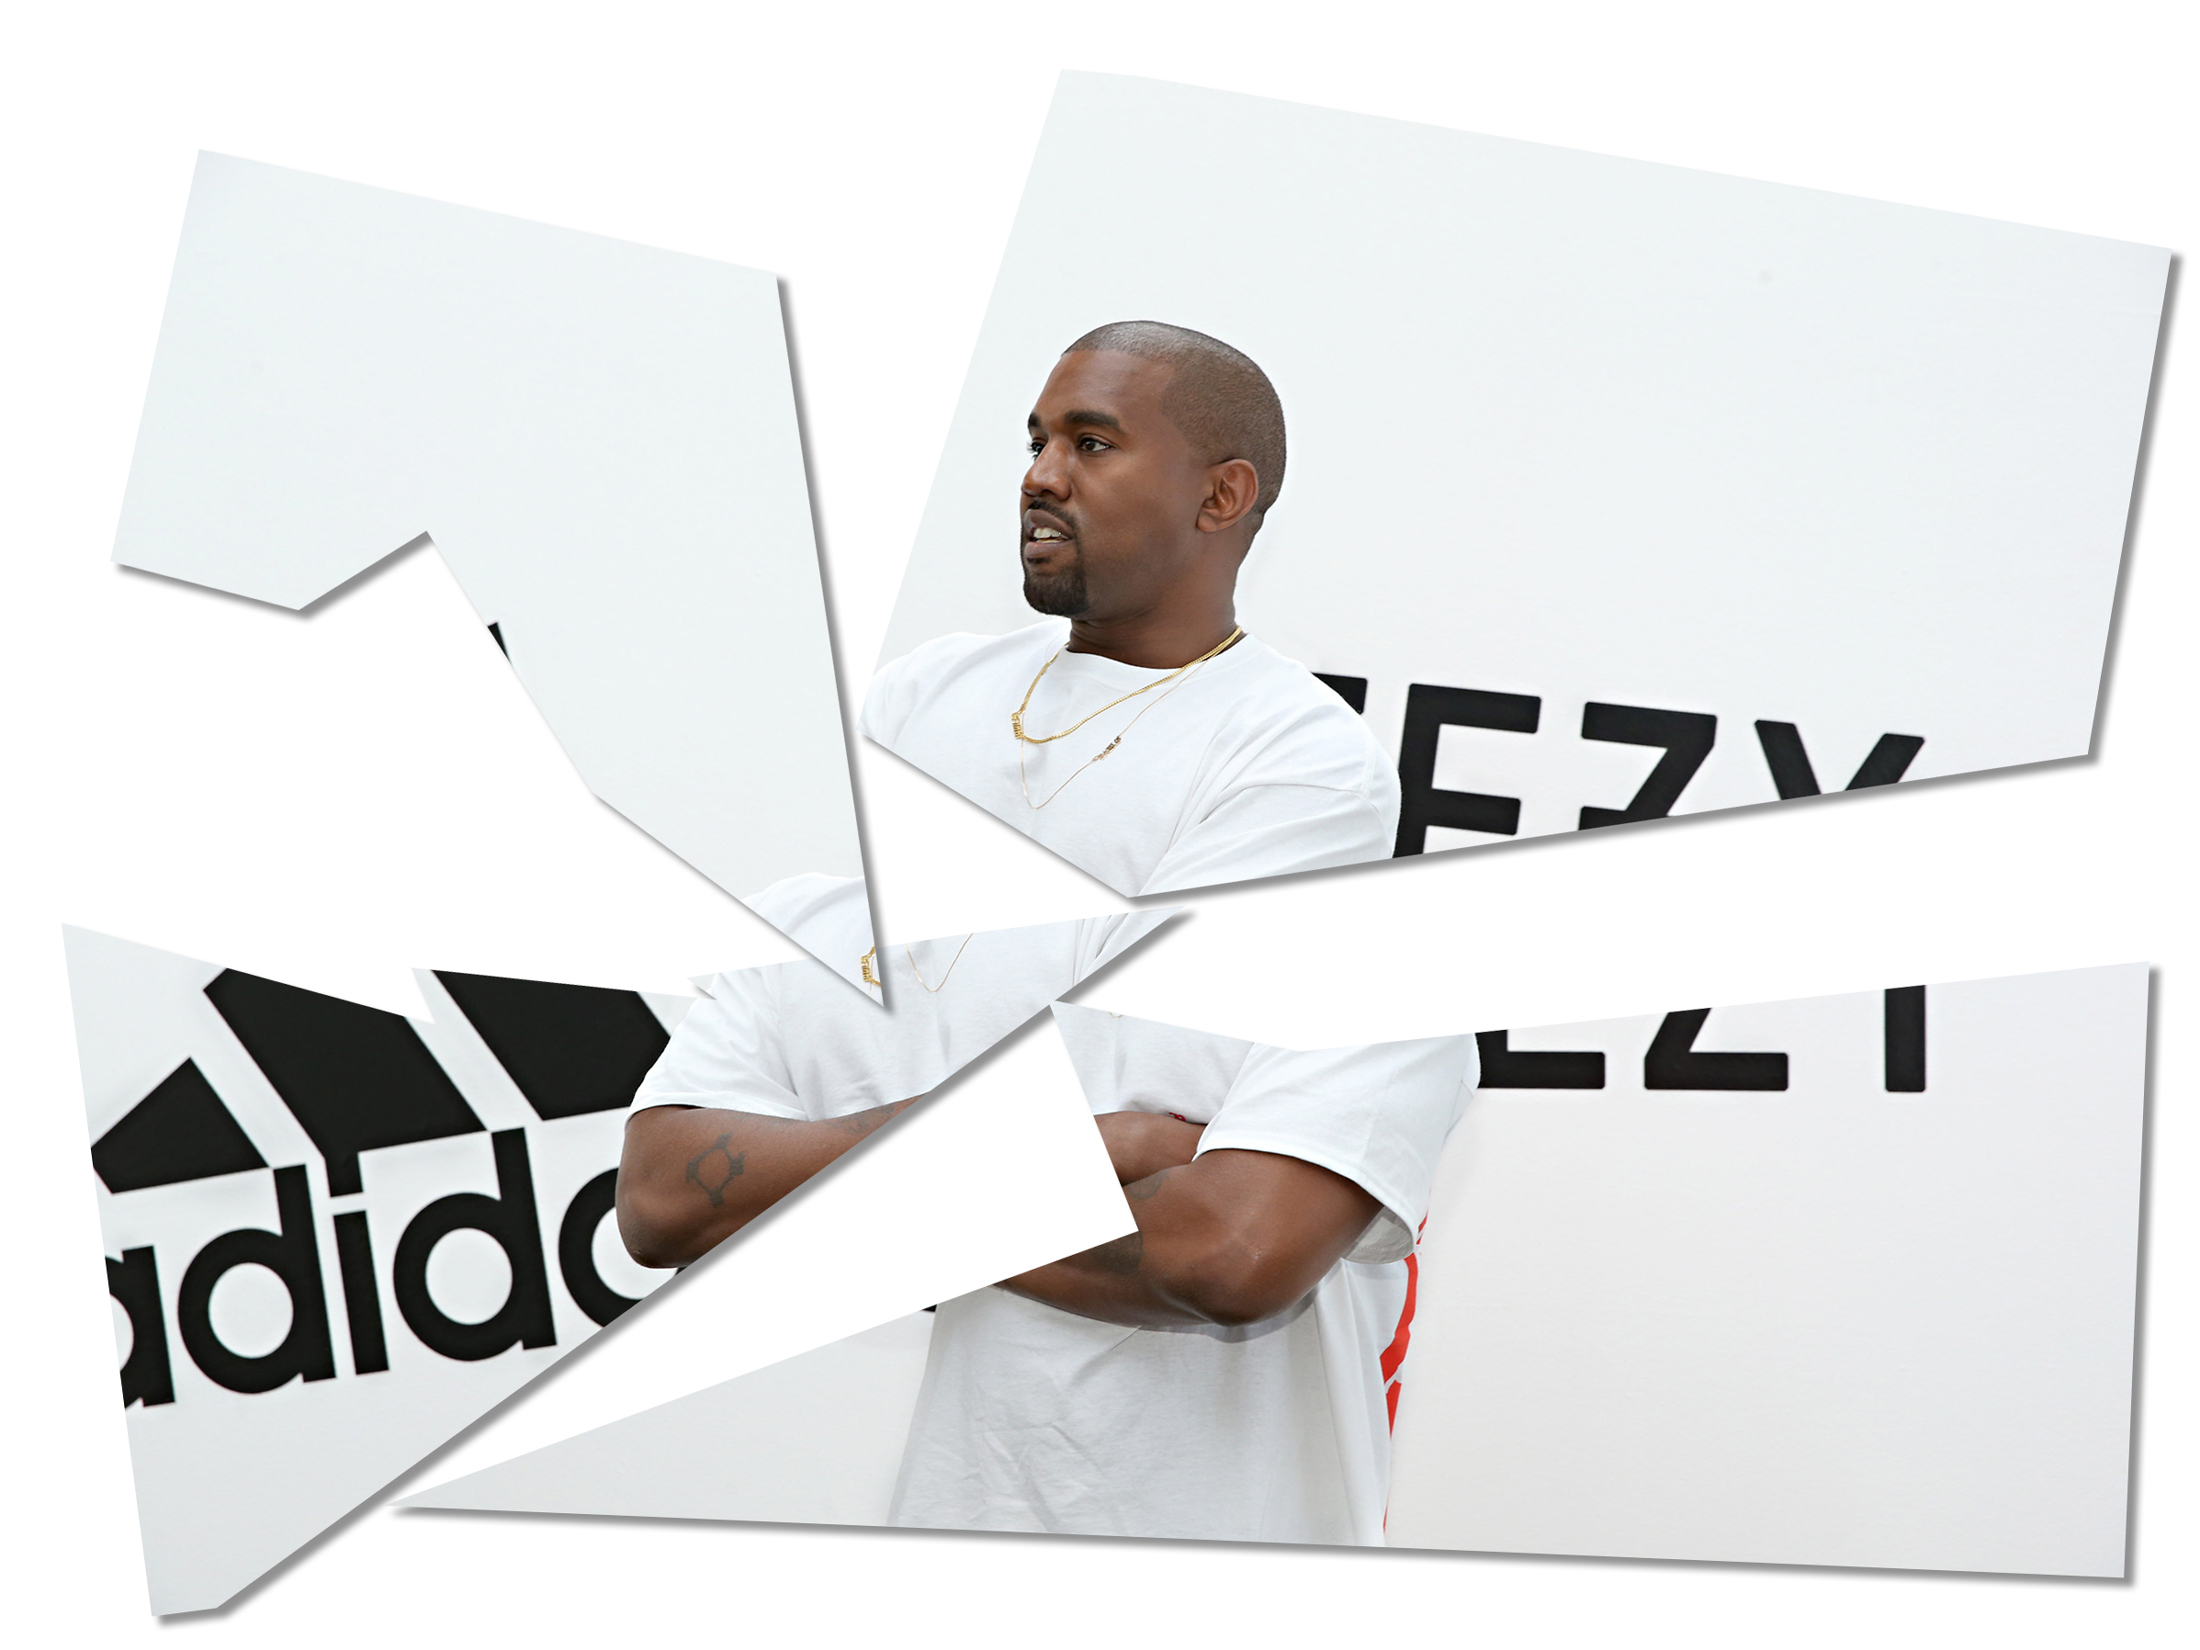 Kanye West-Adidas Split Was Brewing for Years - Bloomberg